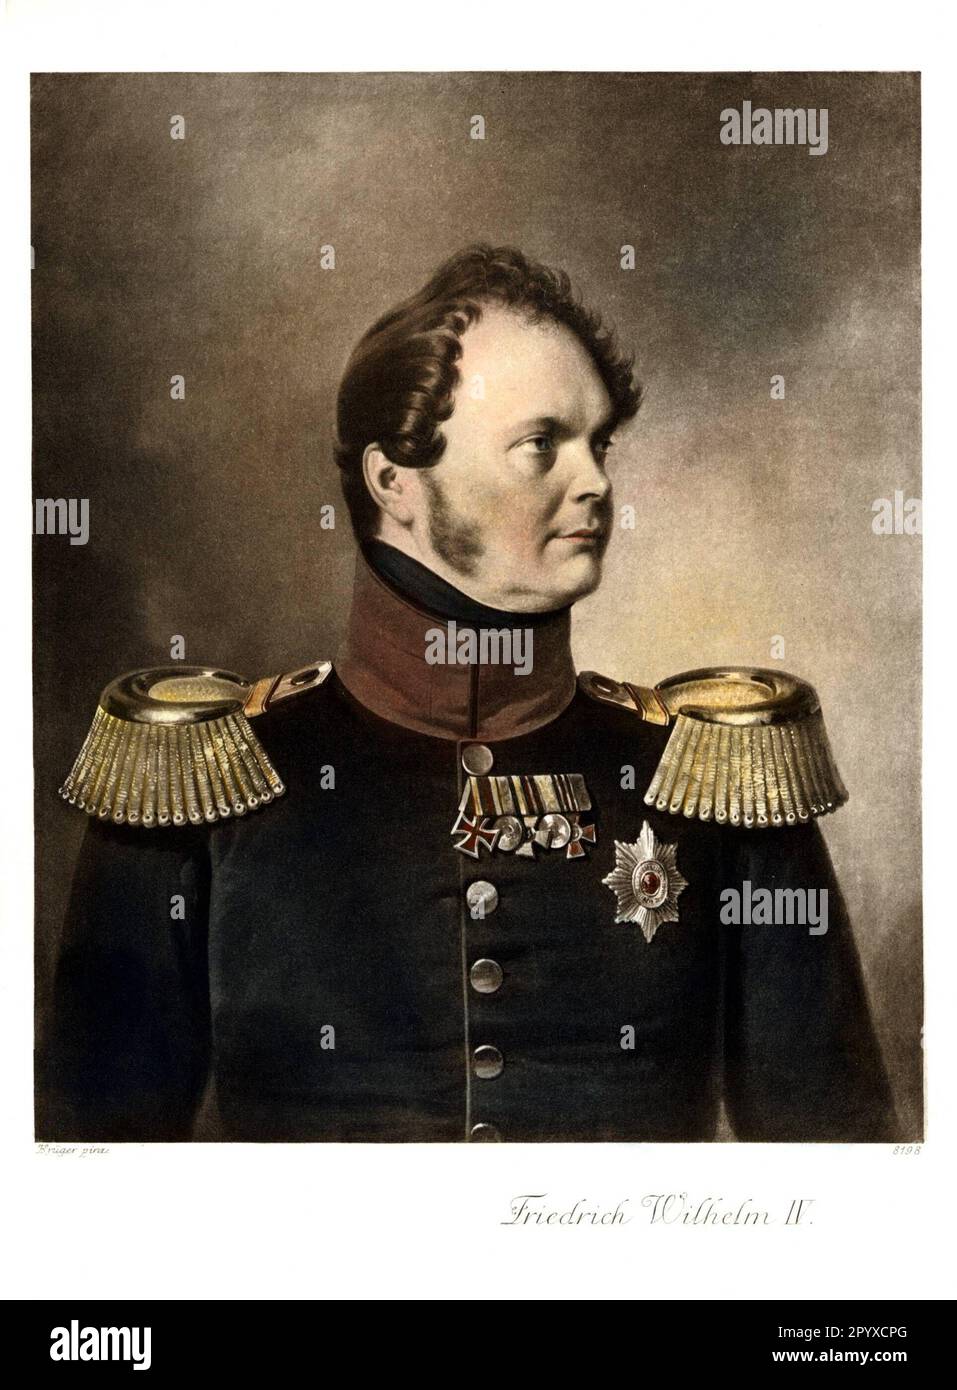 Frederick William IV (1795-1861), King of Prussia (1840-61). Painting by Franz Krüger. Photo: Heliogravure, Corpus Imaginum, Hanfstaengl Collection. [automated translation] Stock Photo